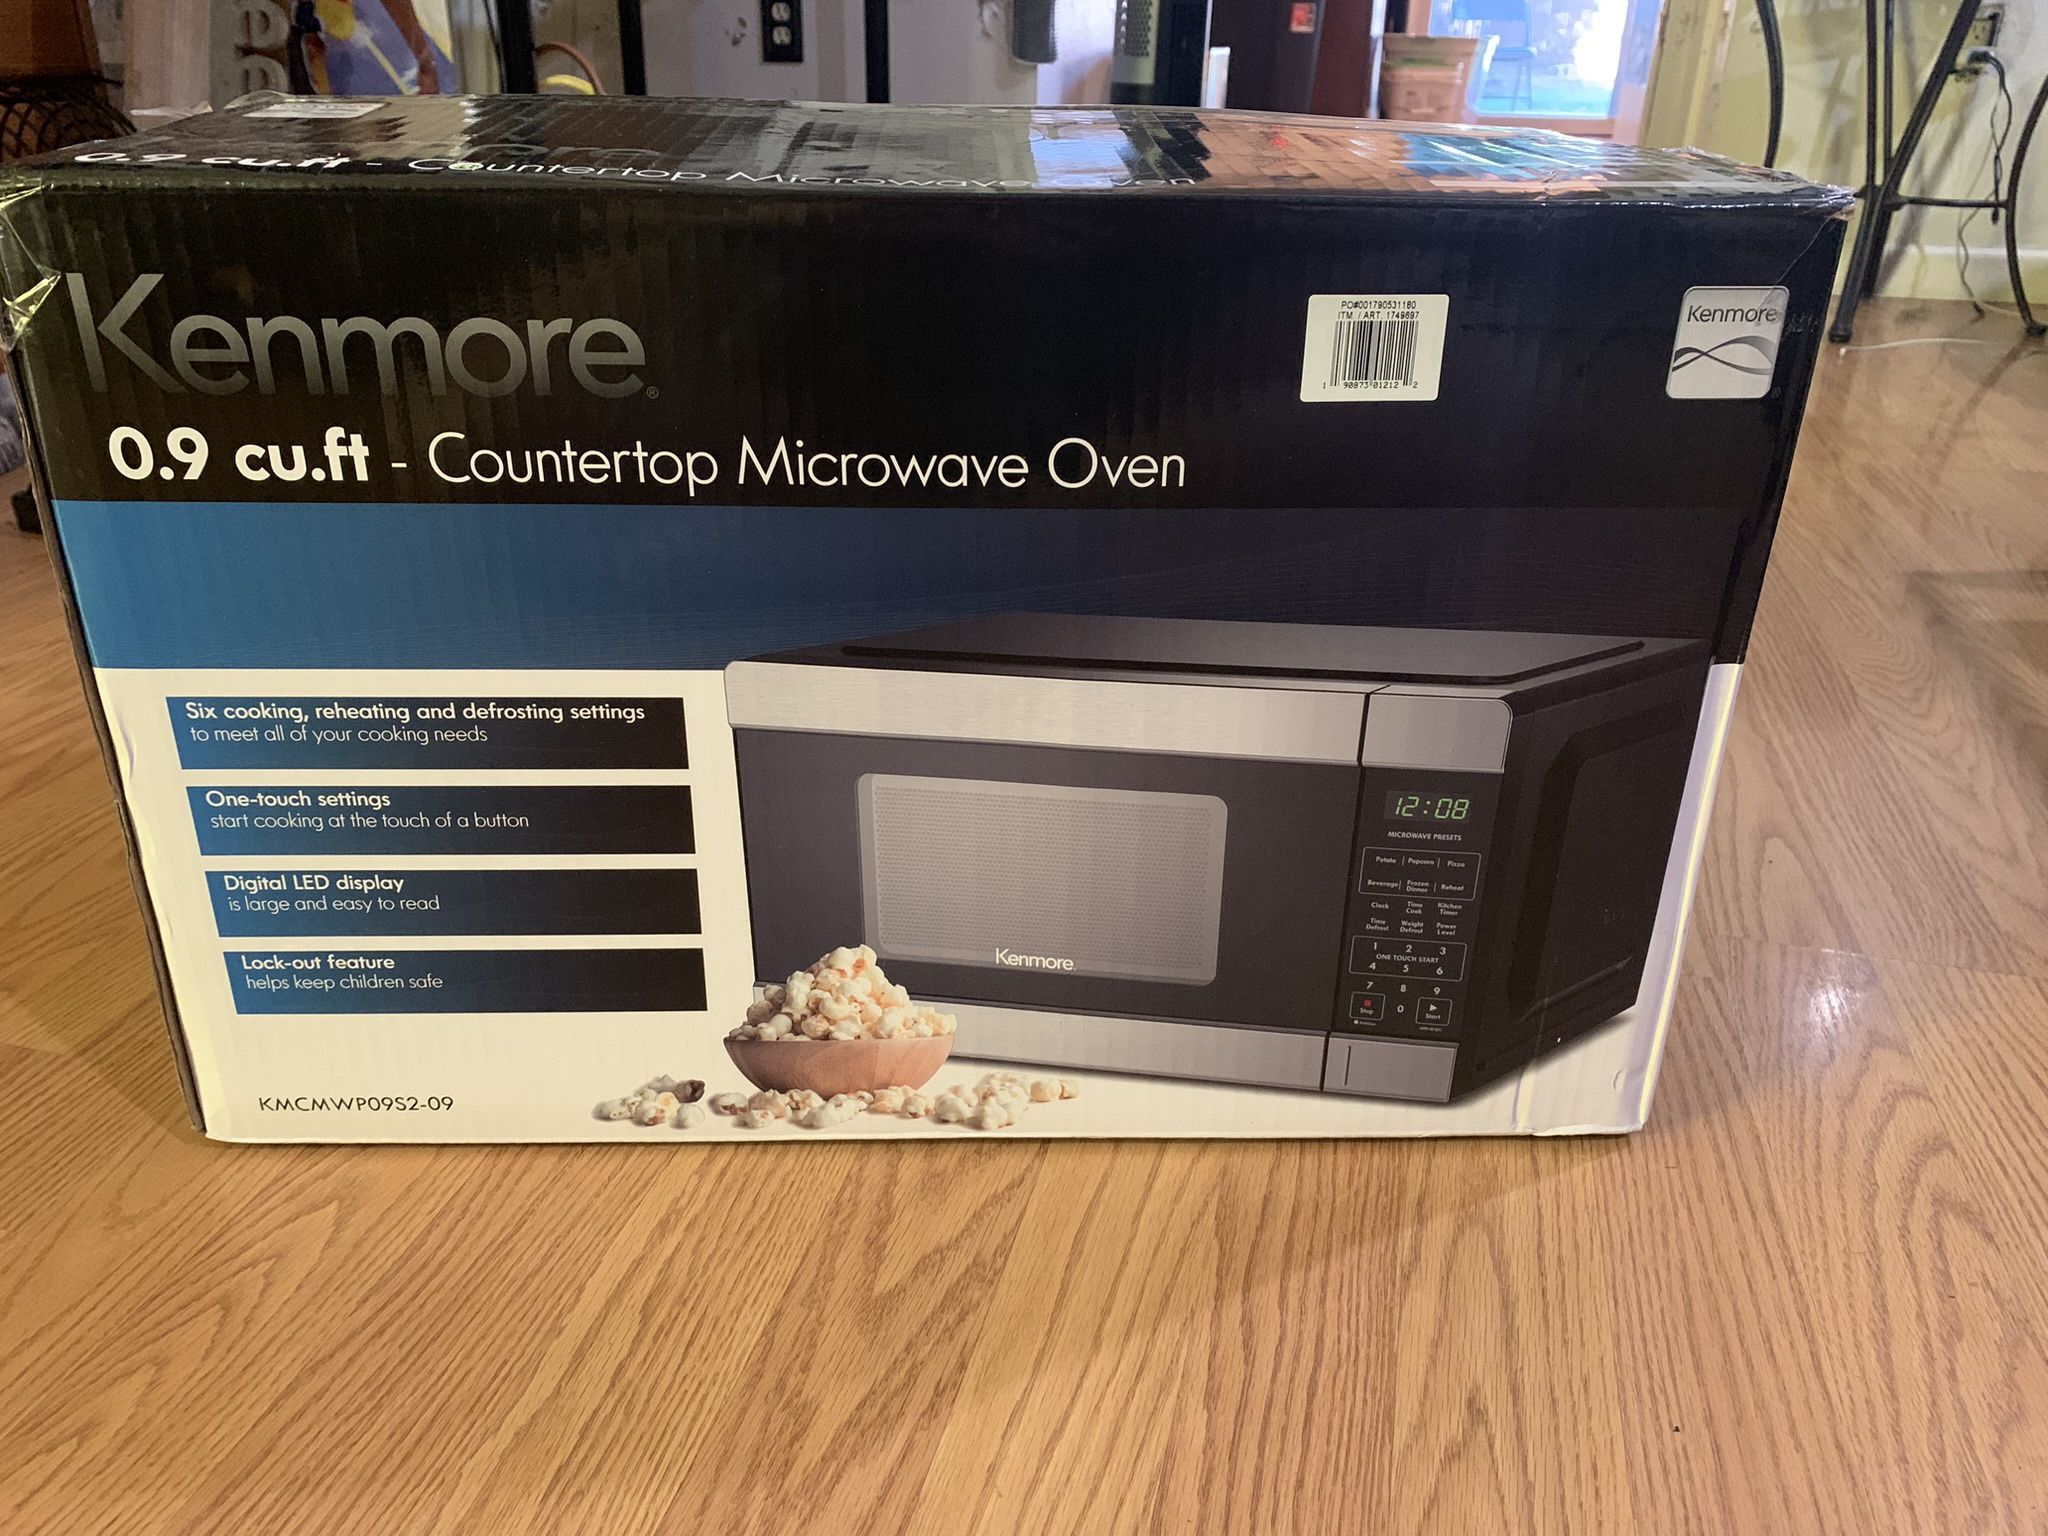 Brand new in box Kenmore microwave